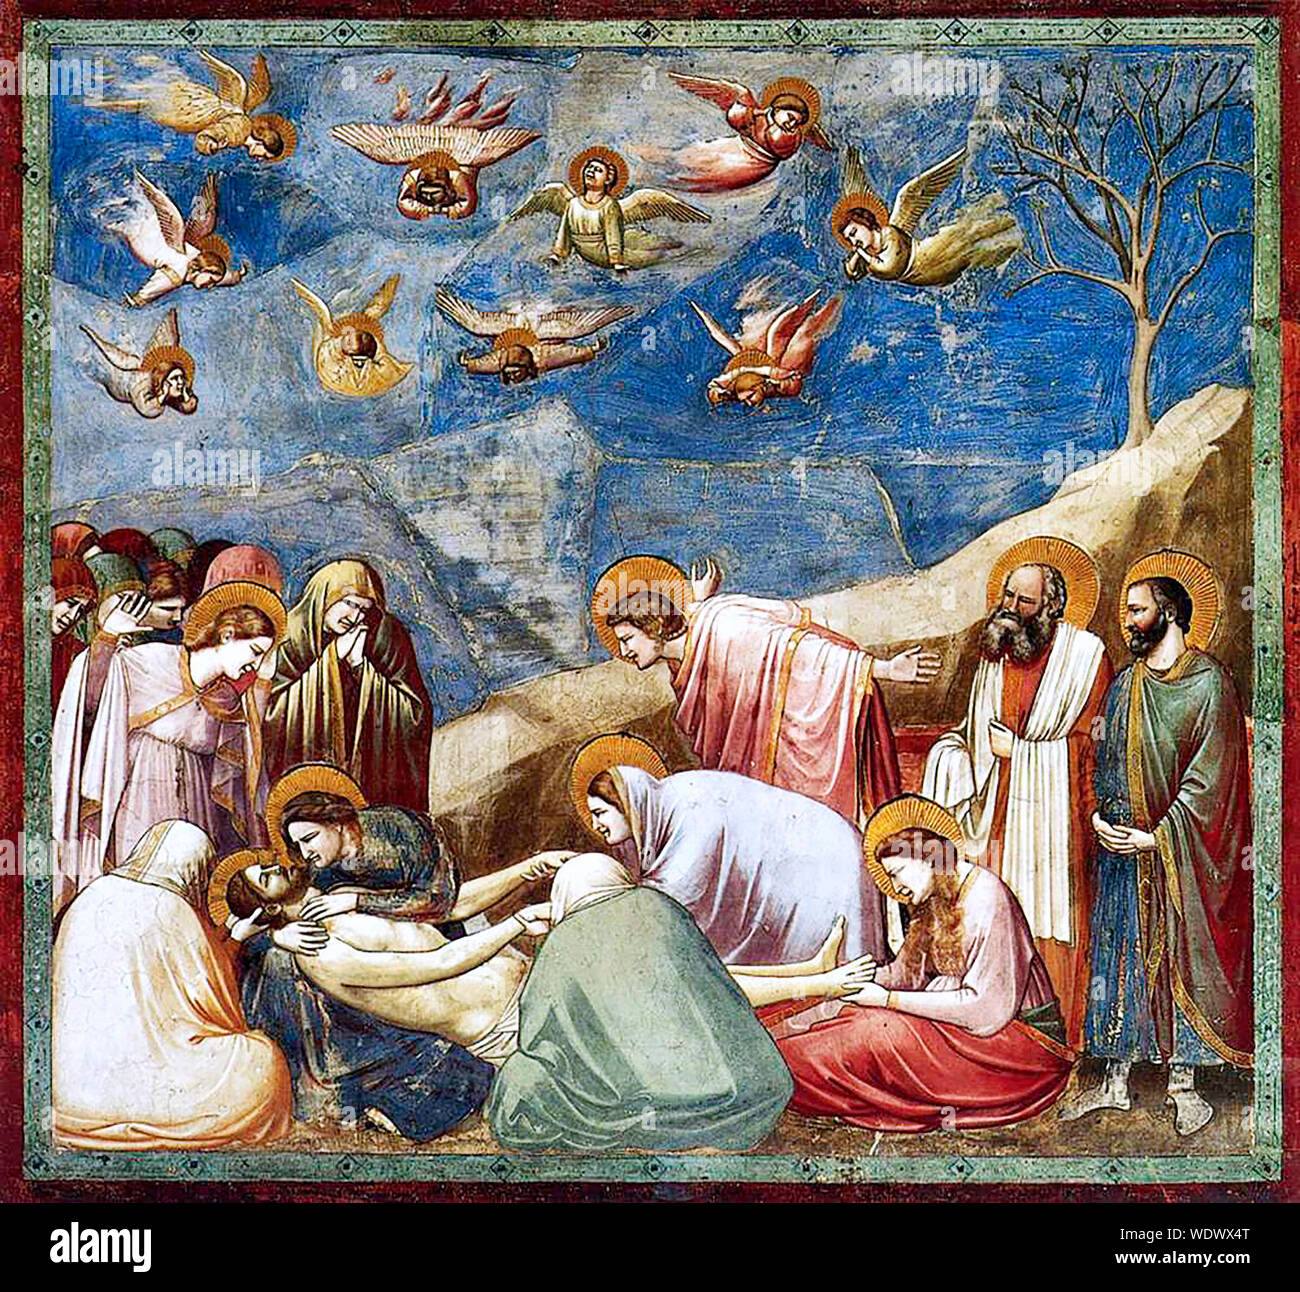 Scenes from the Life of Christ: 20. Lamentation (The Mourning of Christ) - Giotto di Bondone, circa 1305 Stock Photo